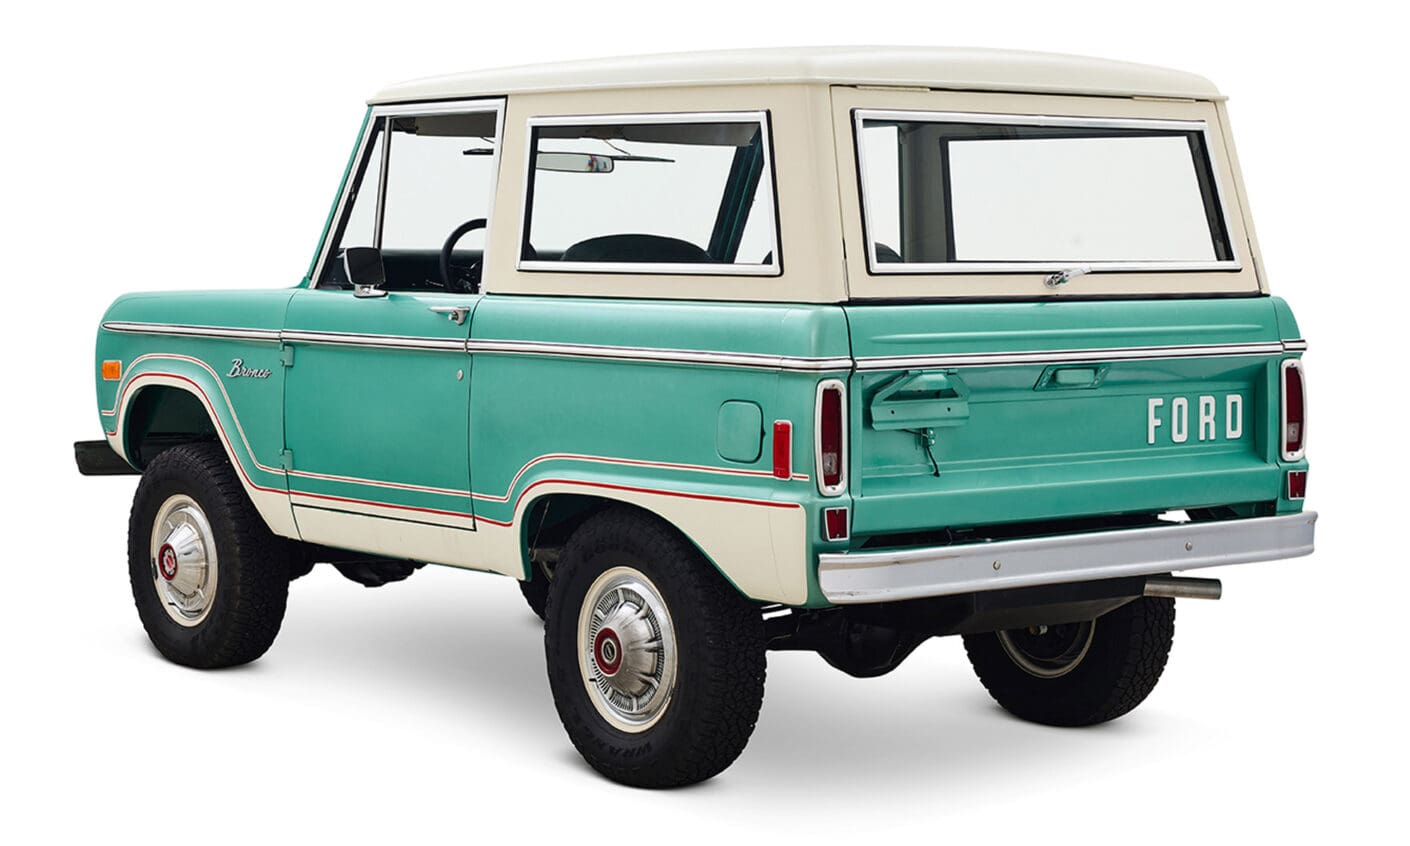 Ford Bronco 1977 Light Jade 302 v8 with Wimbledon White Hard Top